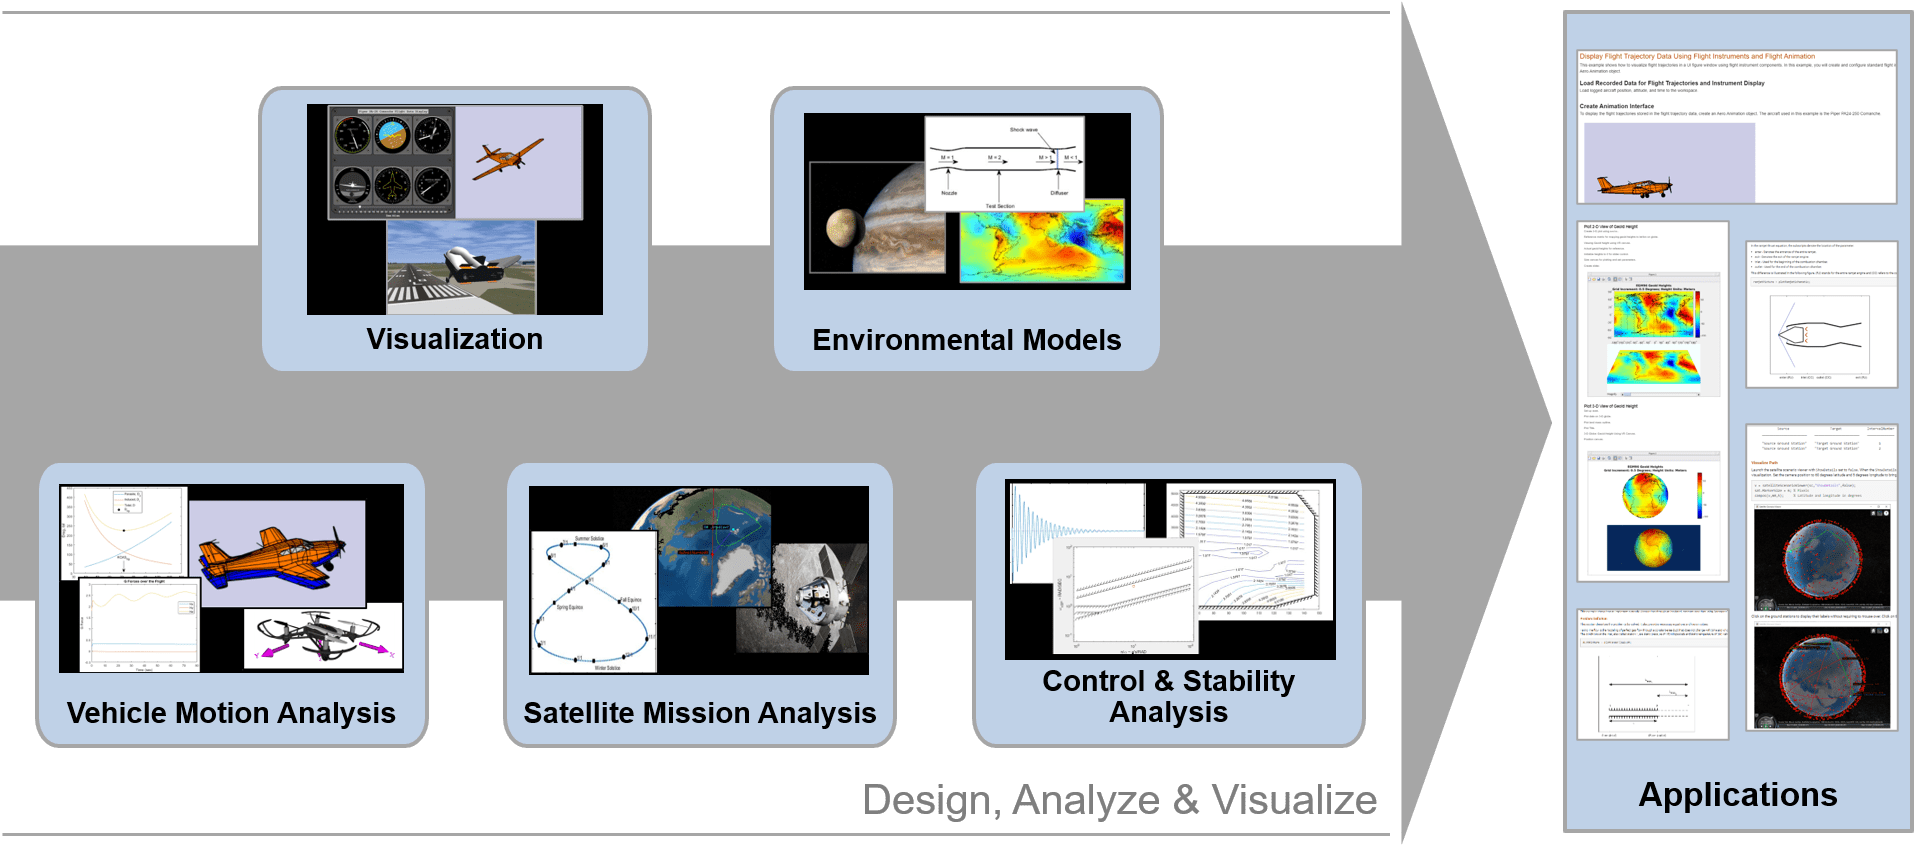 Overview of Aerospace Toolbox capabilities.